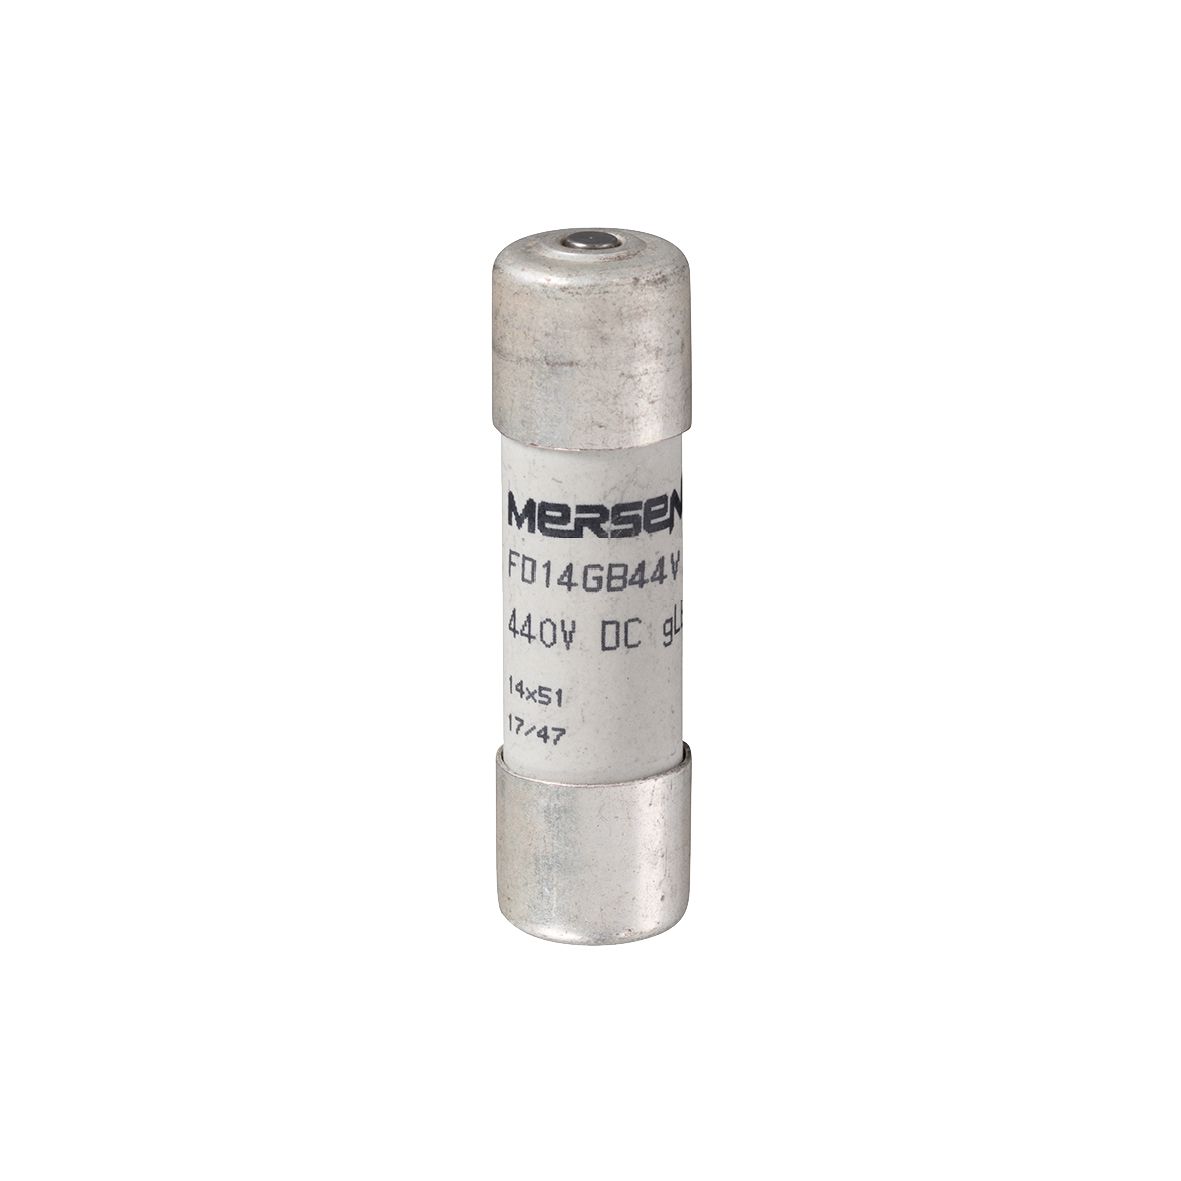 Q094084 - Cylindrical fuse-link GRB 440VDC 14x51, 6A with striker